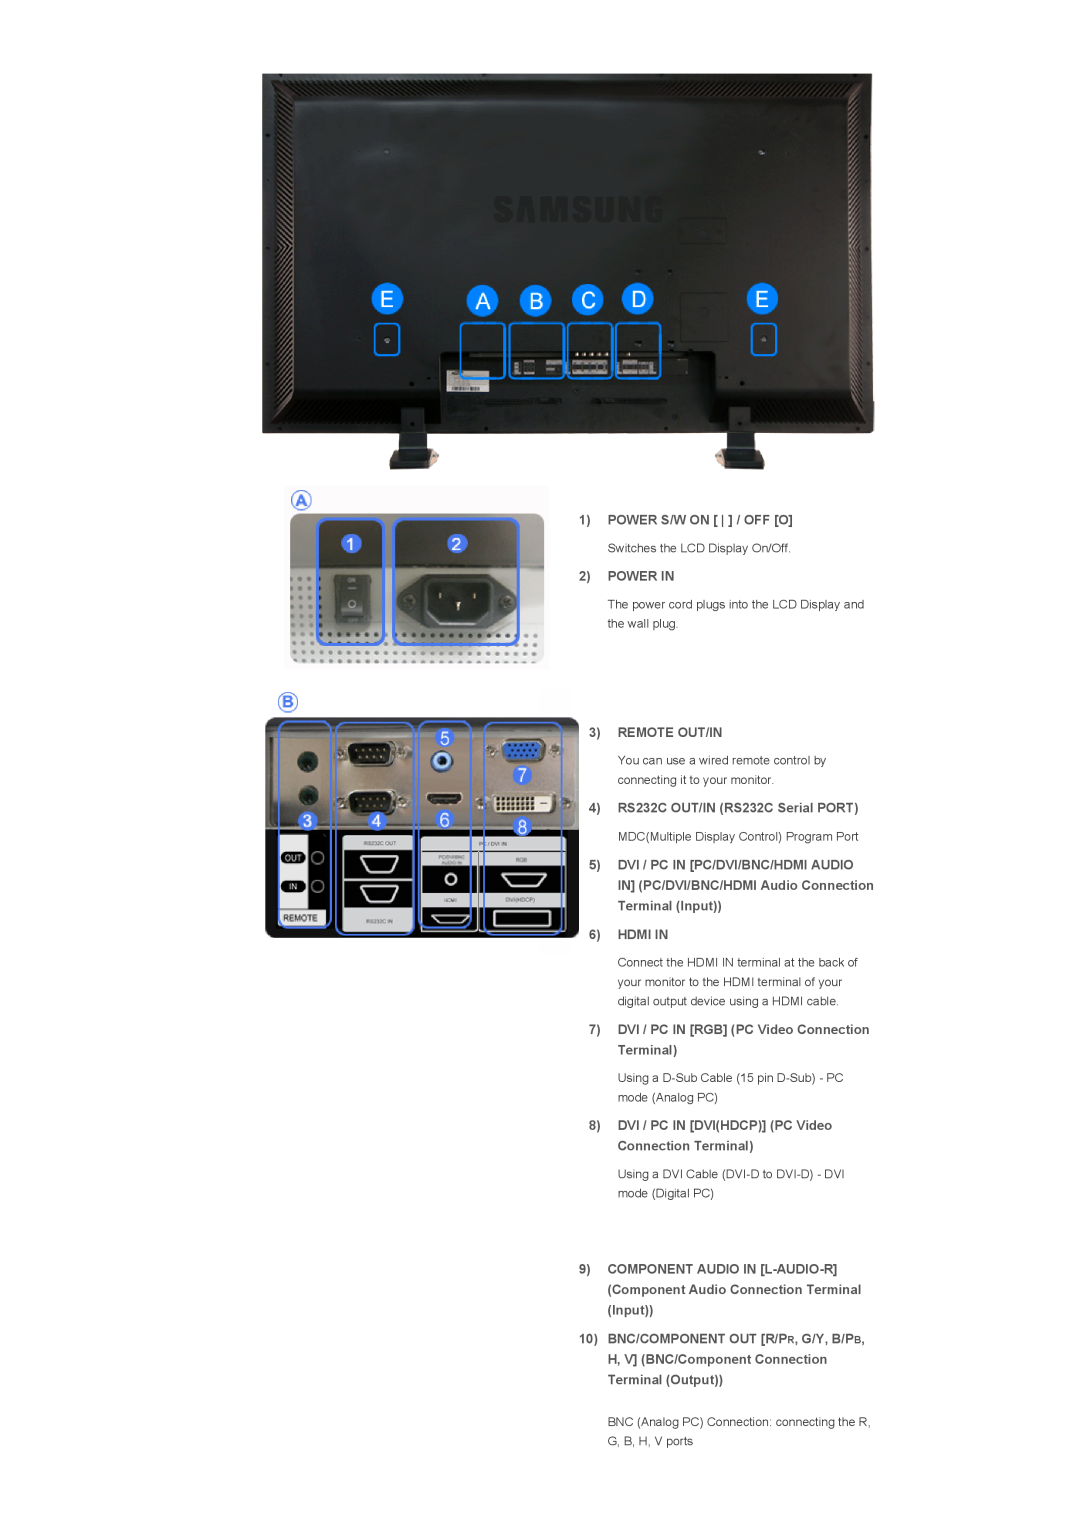 Samsung 400DX, 460DX specifications Power In, Remote Out/In, Hdmi In, DVI / PC IN RGB PC Video Connection Terminal 